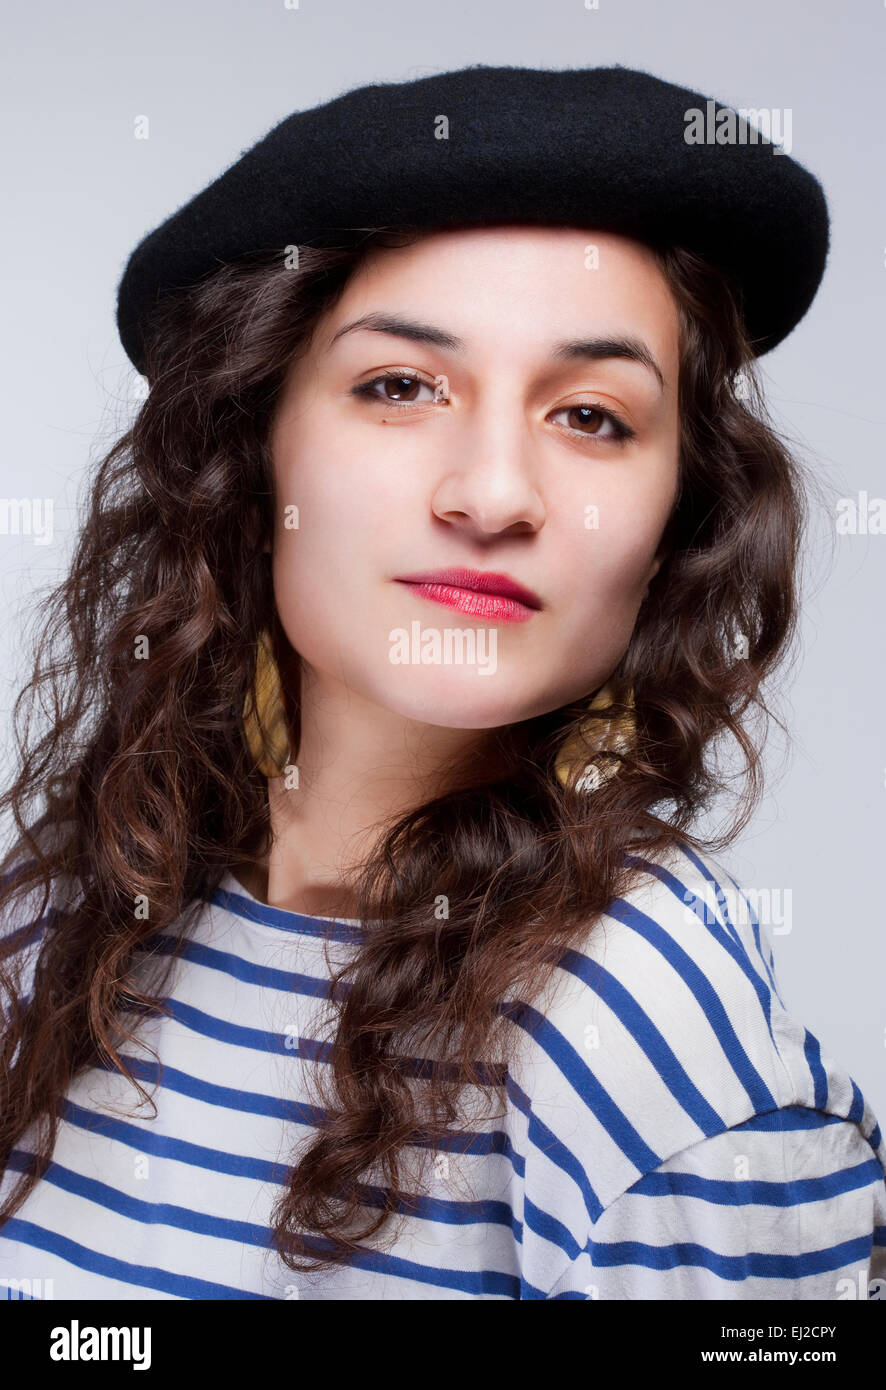 Portrait of a Young Woman with Barrett Hat and Striped T-shirt Stock Photo